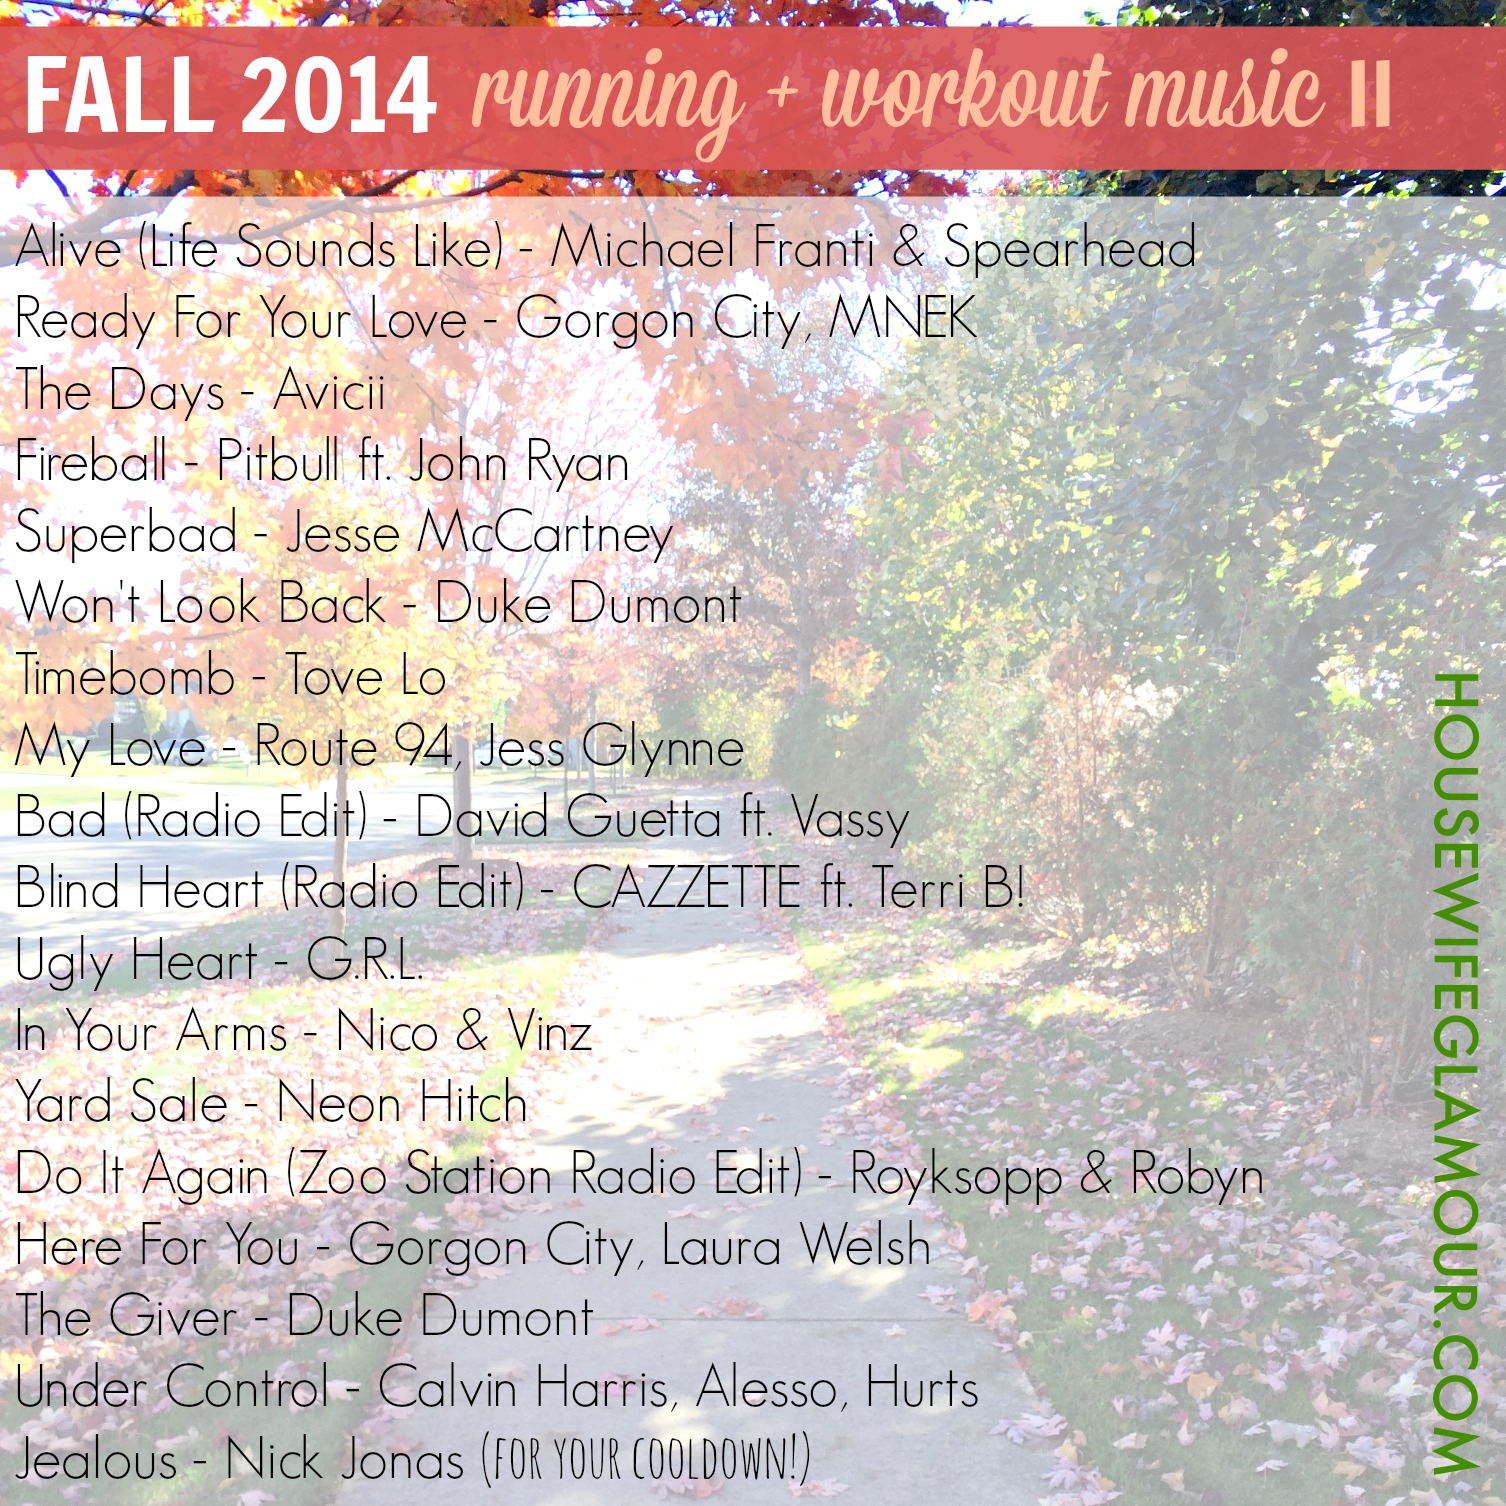 Fall Running and Workout Music Playlist